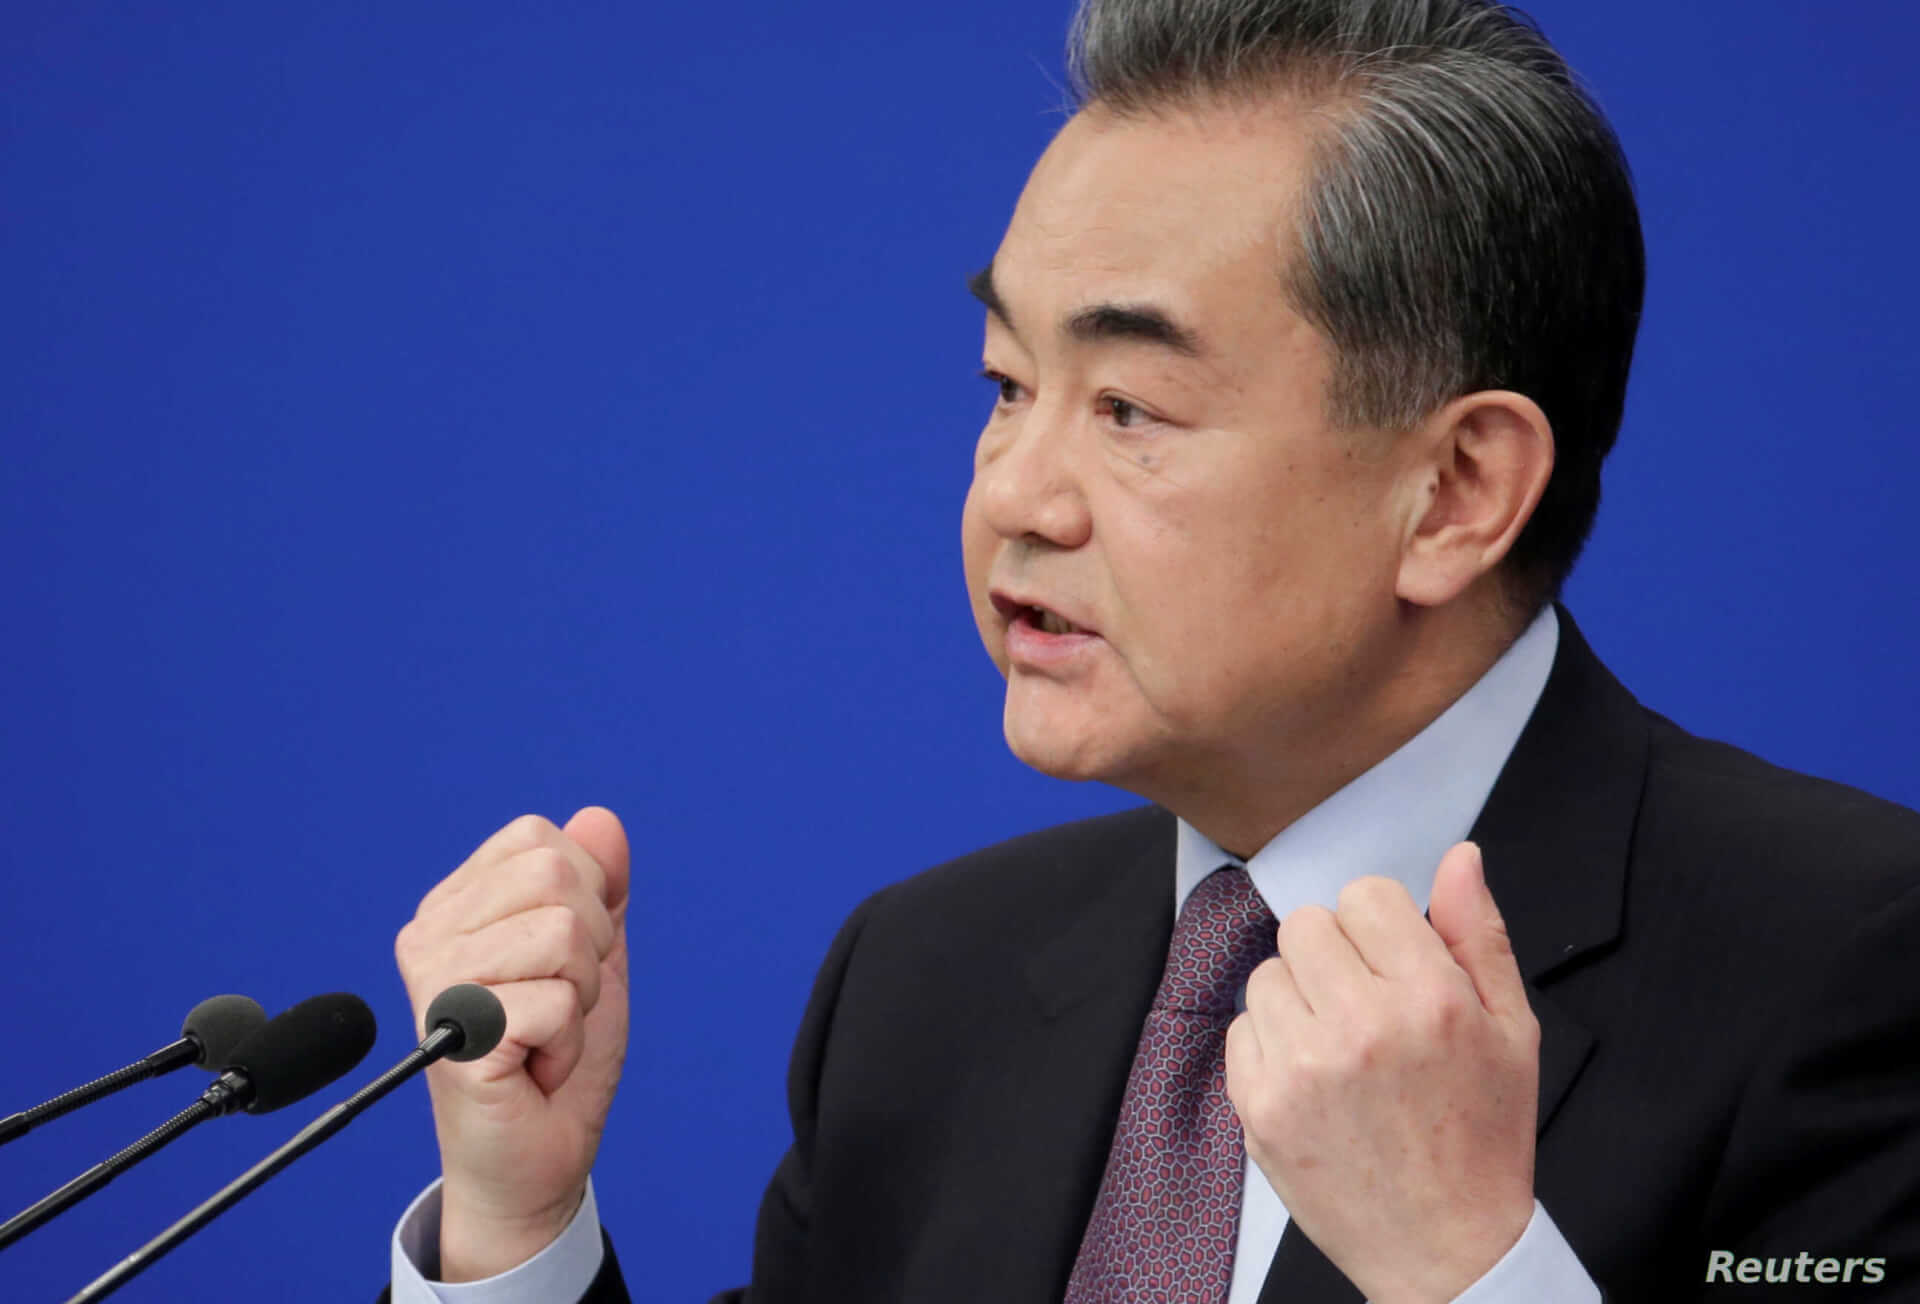 Chinese Foreign Minister Warns US Against Pushing the Two “To the Brink of a New Cold War”